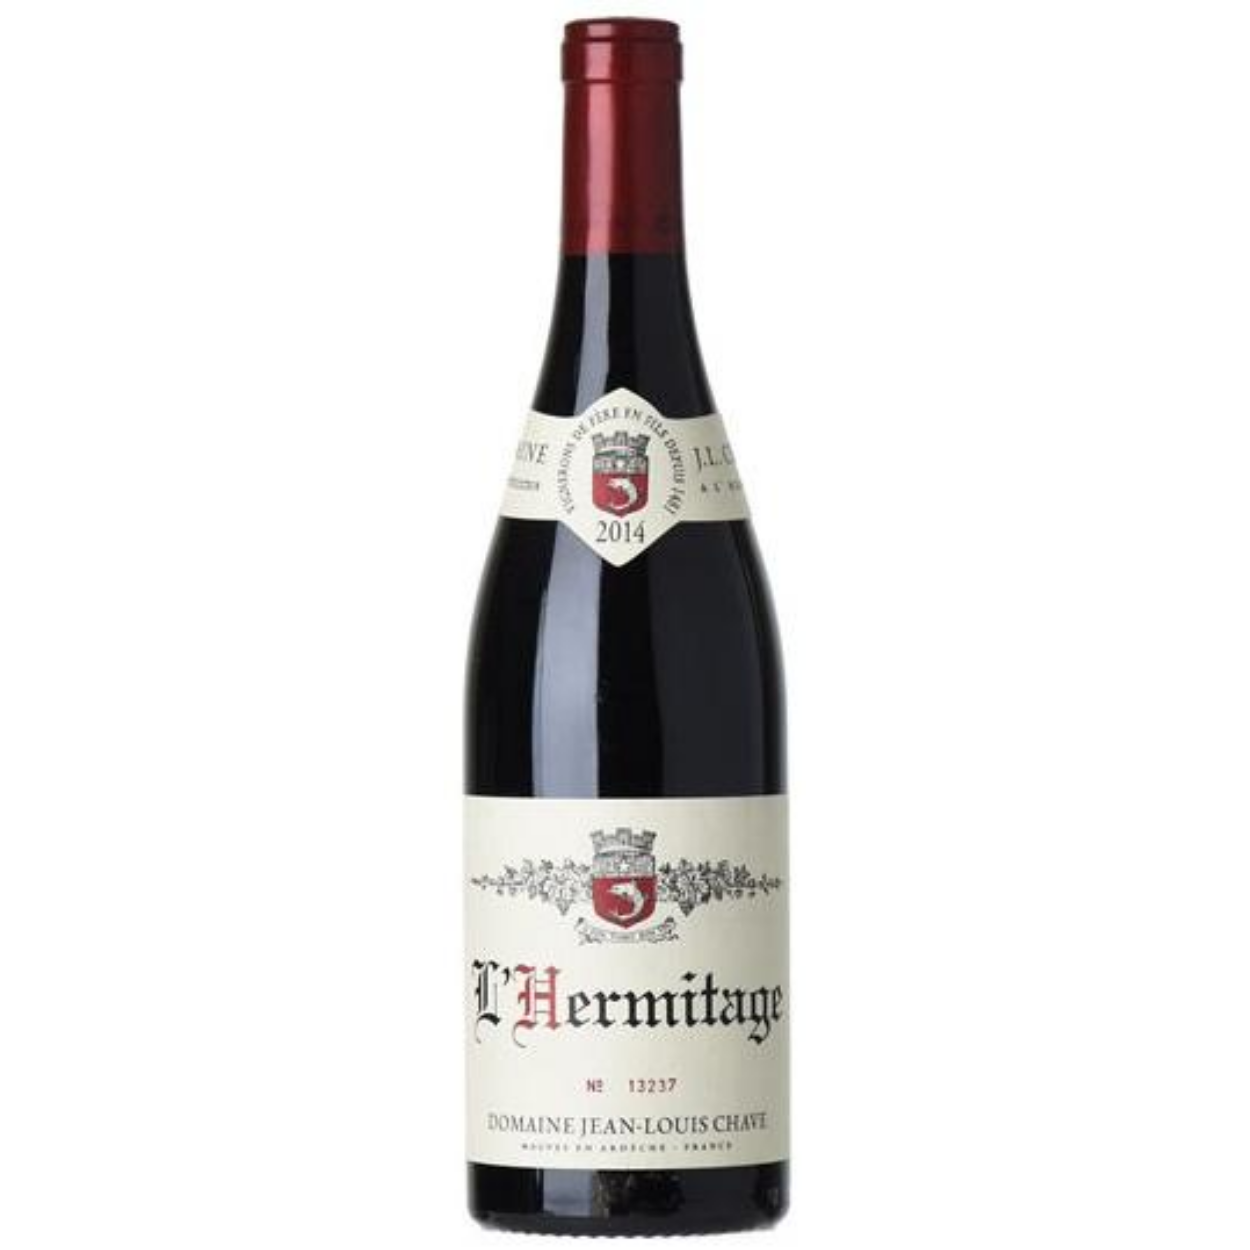 2014 Domaine Jean-Louis Chave Hermitage Rhone France - The Wine Connection